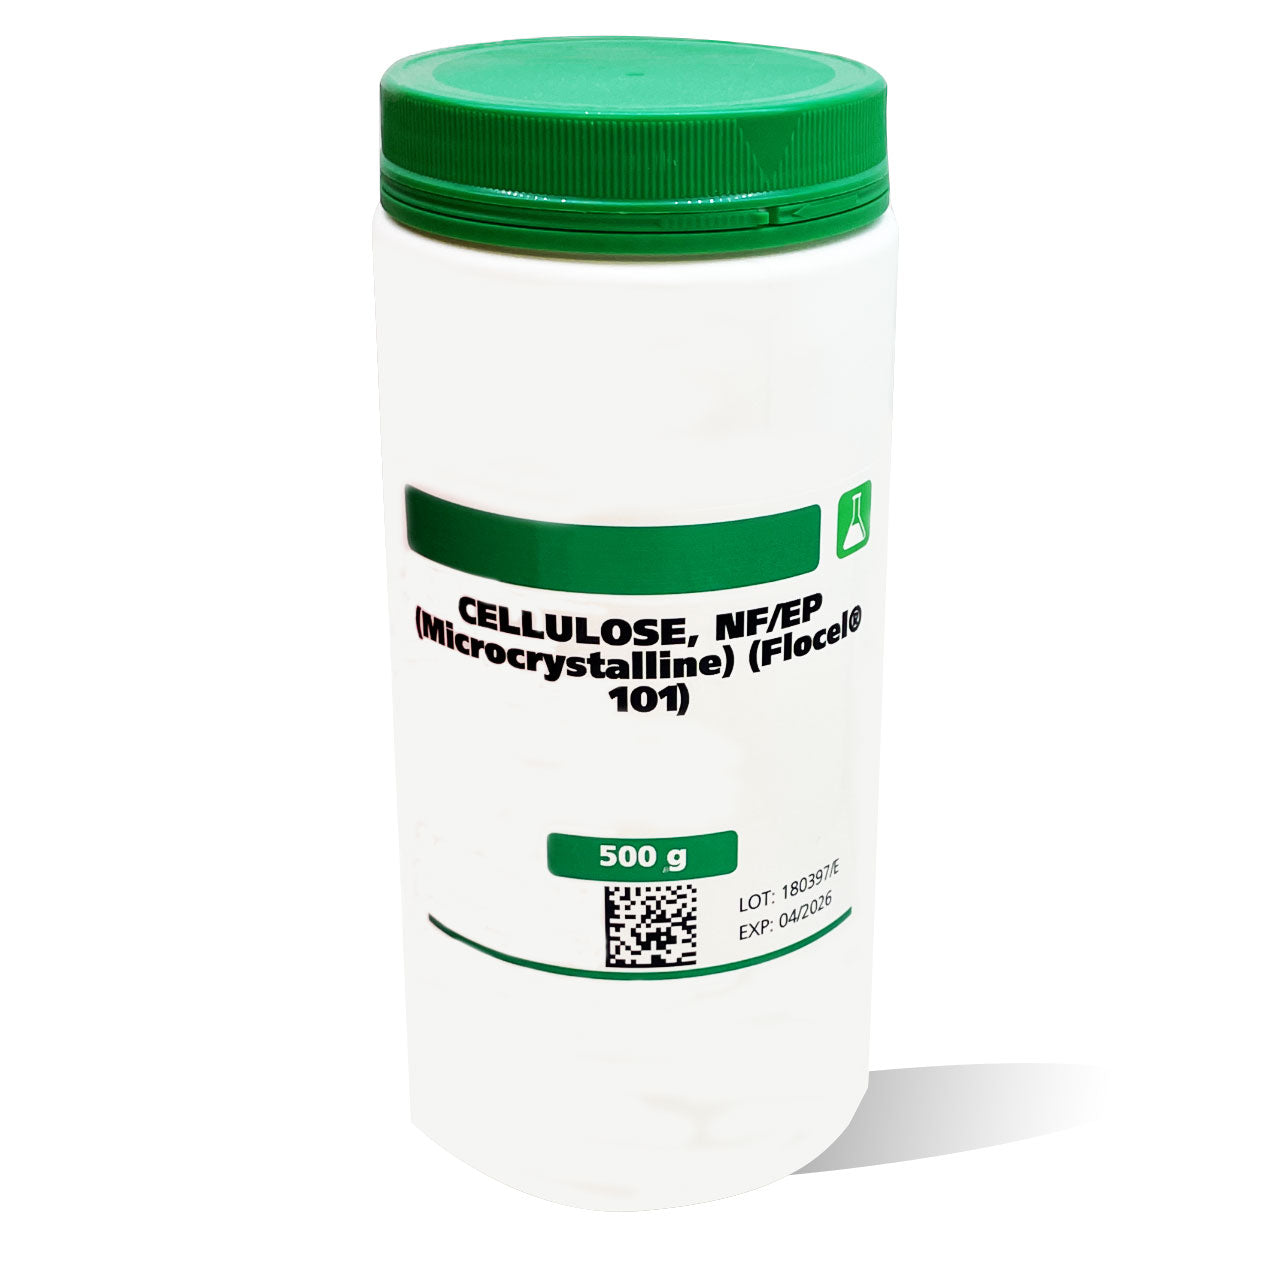 Cellulose, NF/EP (Microcrystalline)